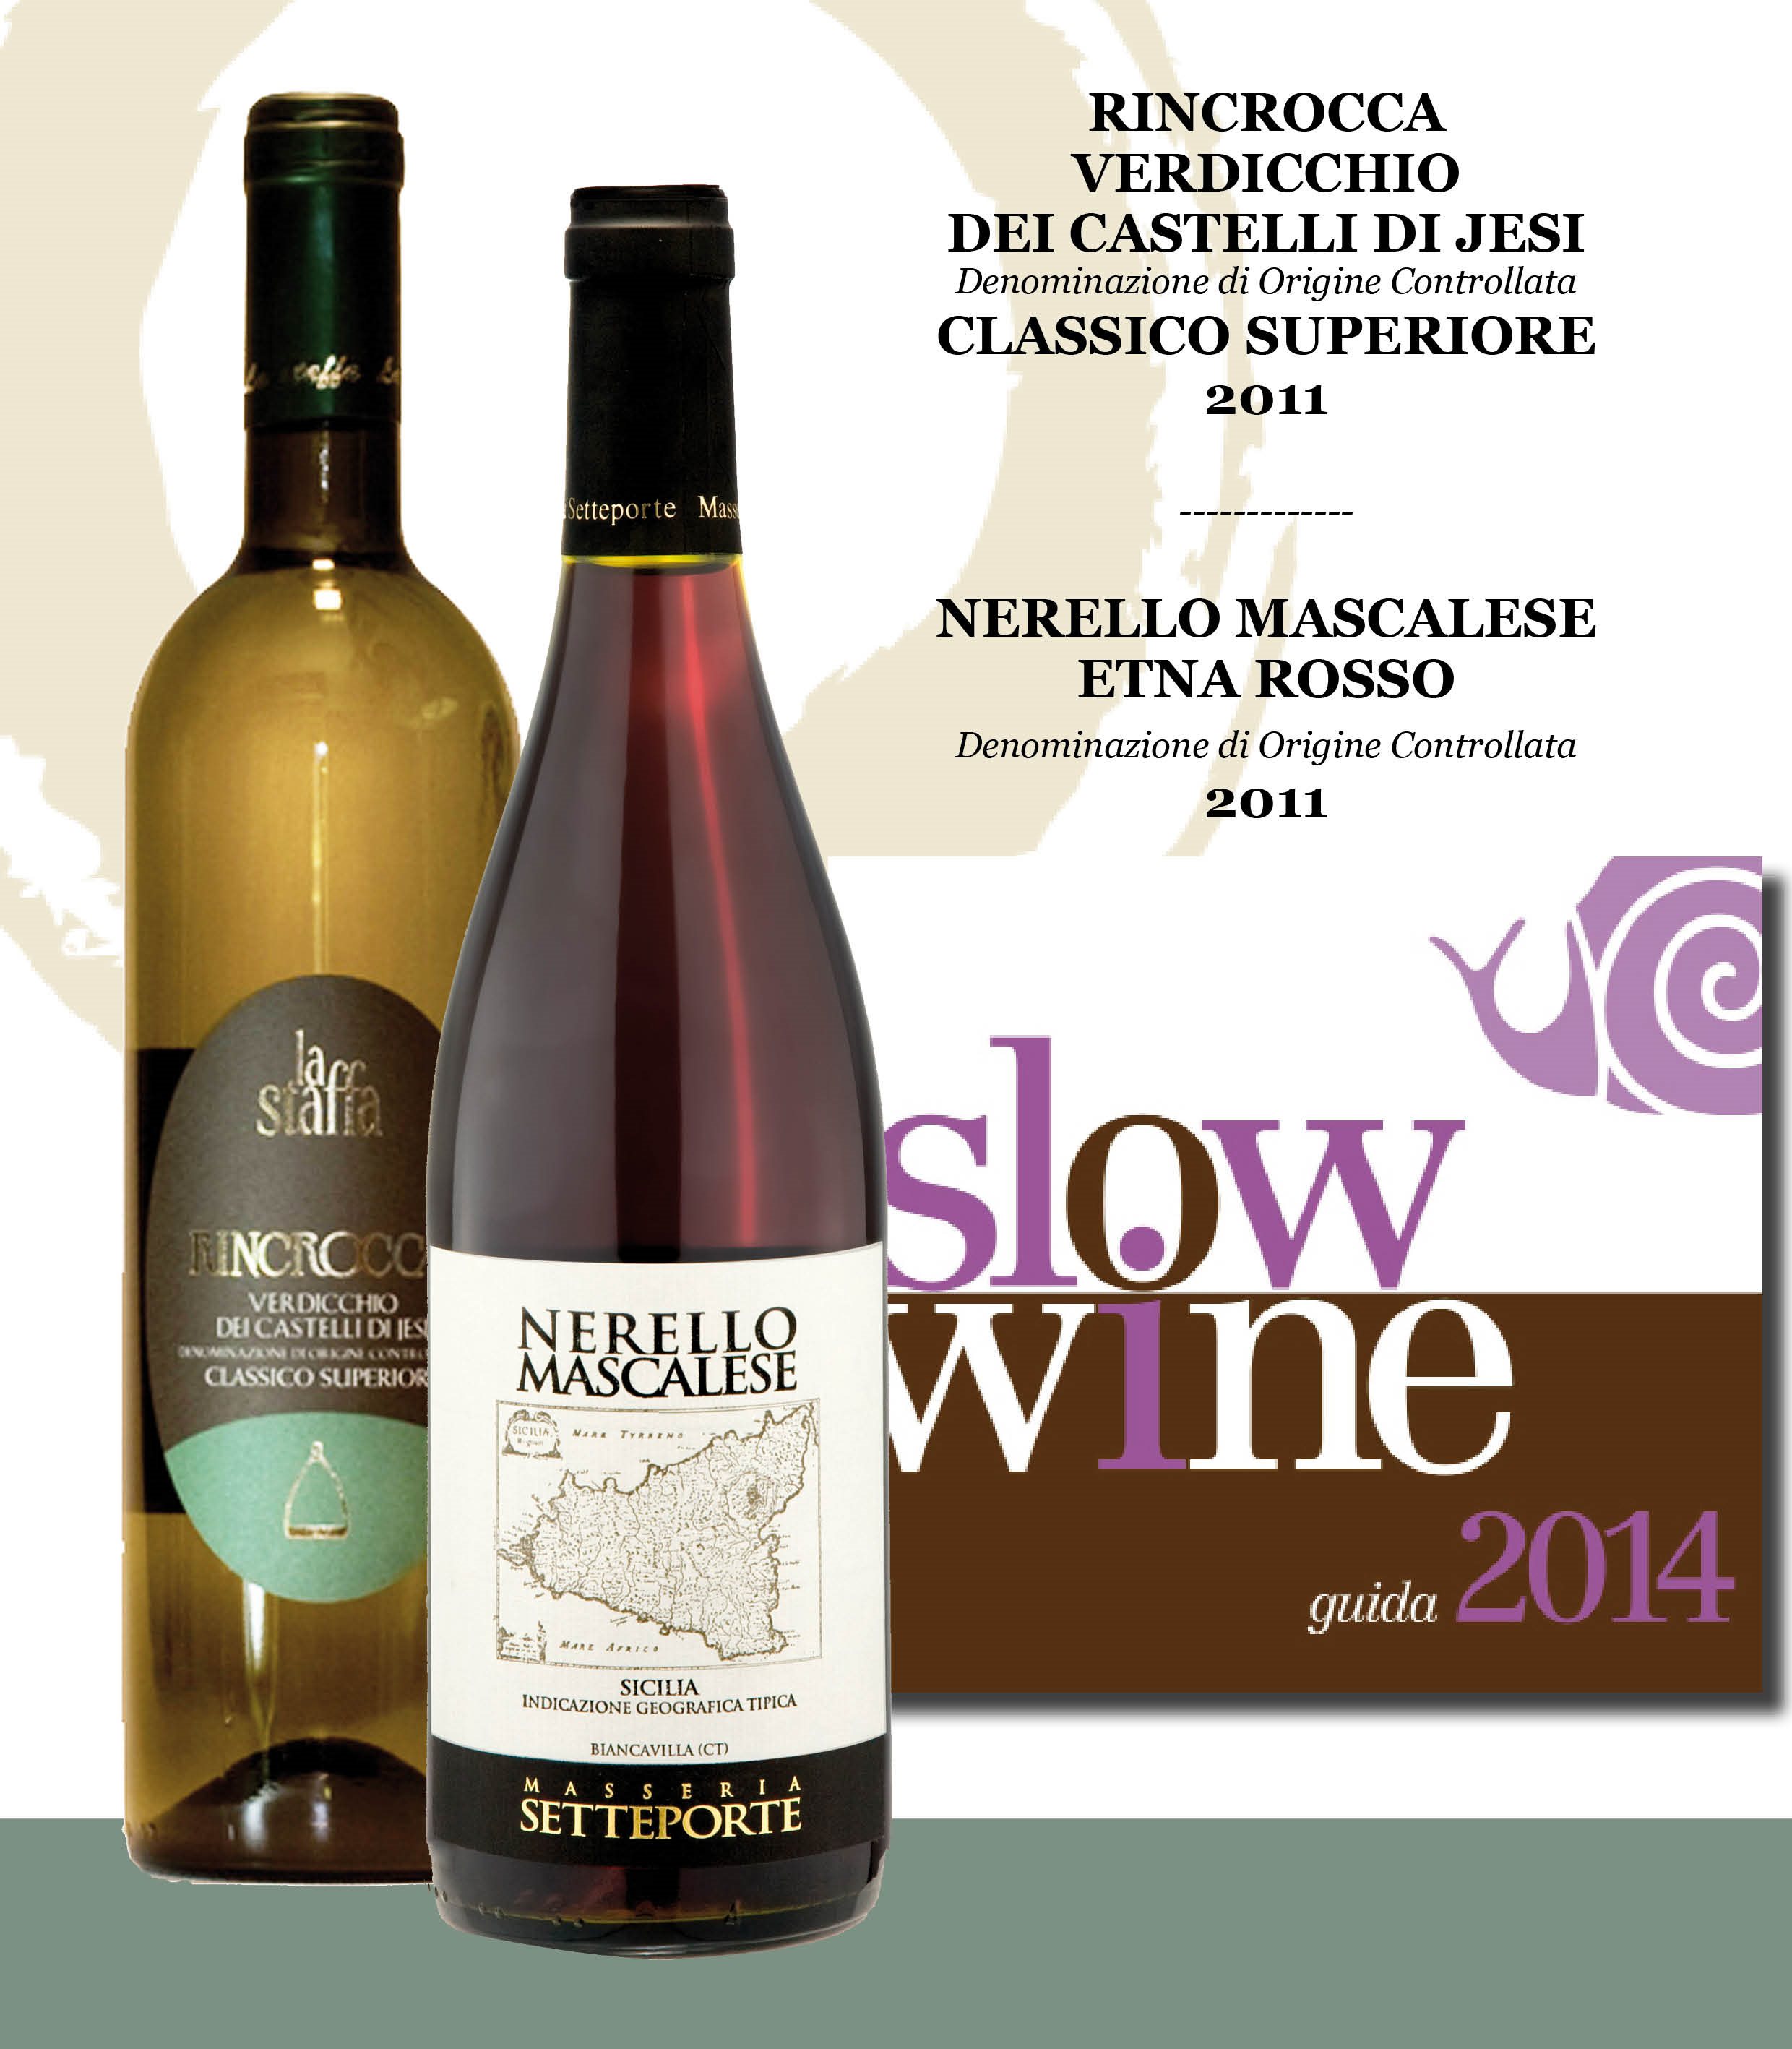 SLOW FOOD awards the SLOW WINE recognition to 2 Classica Intl wines